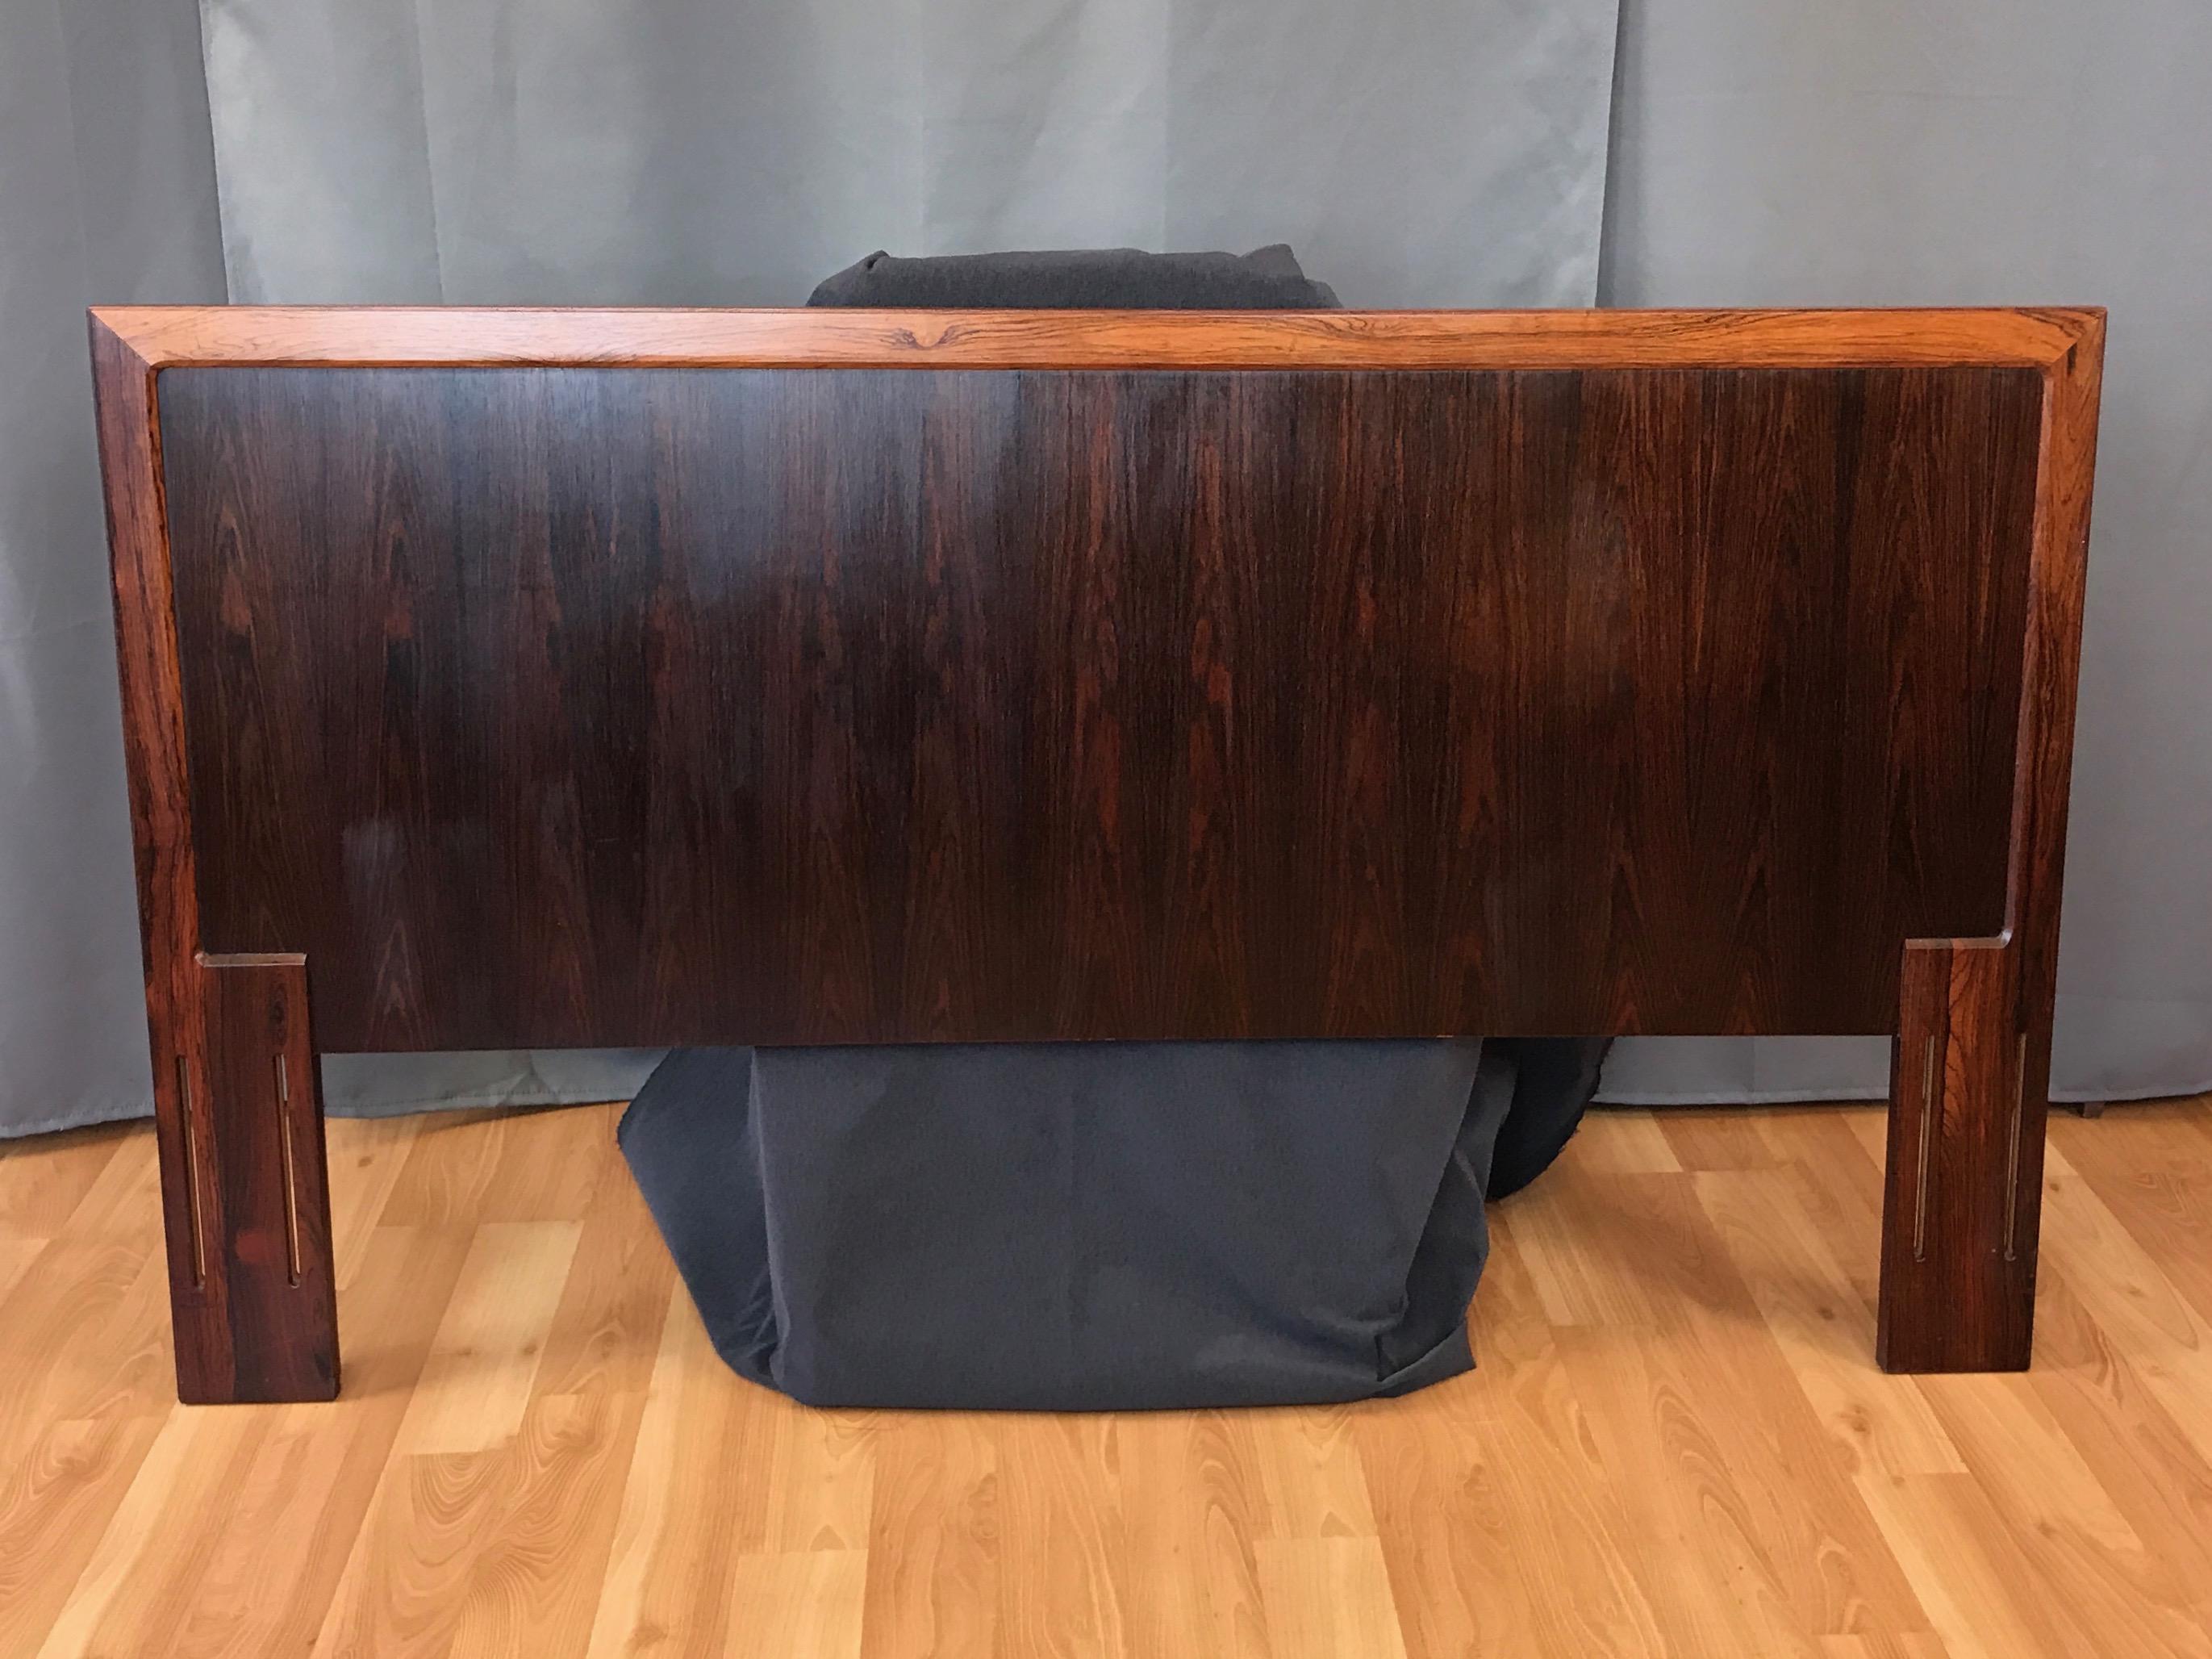 An exceptional late 1960s Danish Modern full or queen size rosewood headboard.

Distinguished by a fantastic expanse of strikingly figured bookmatched Brazilian rosewood veneer. Framed by three finely crafted segments of solid rosewood with